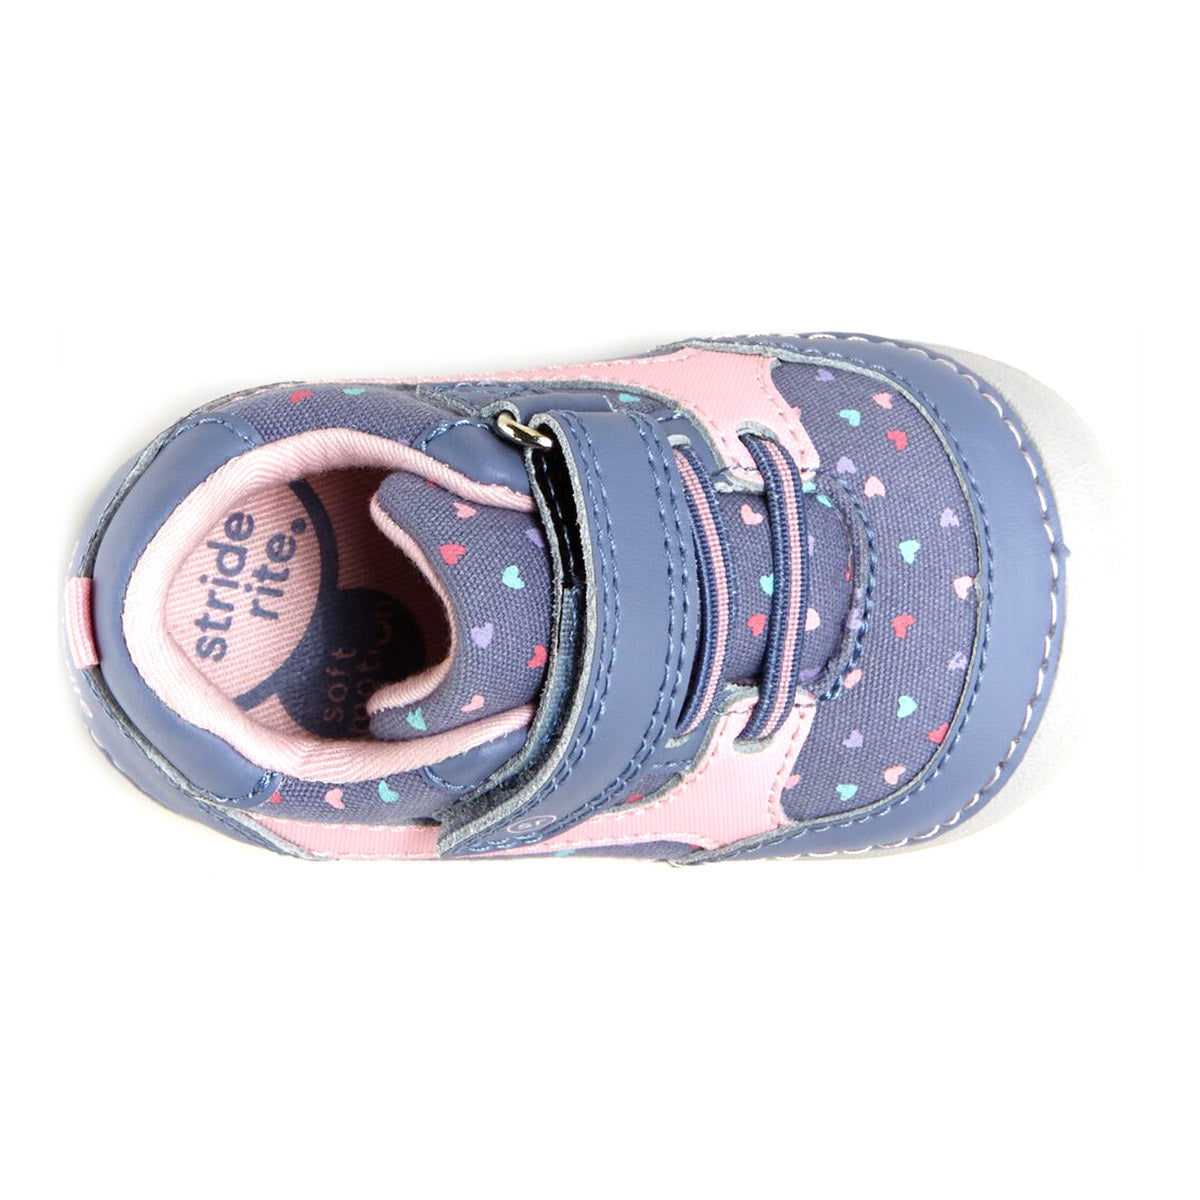 STRIDE RITE SM KYLIN CHAMBRAY - TODDLERS